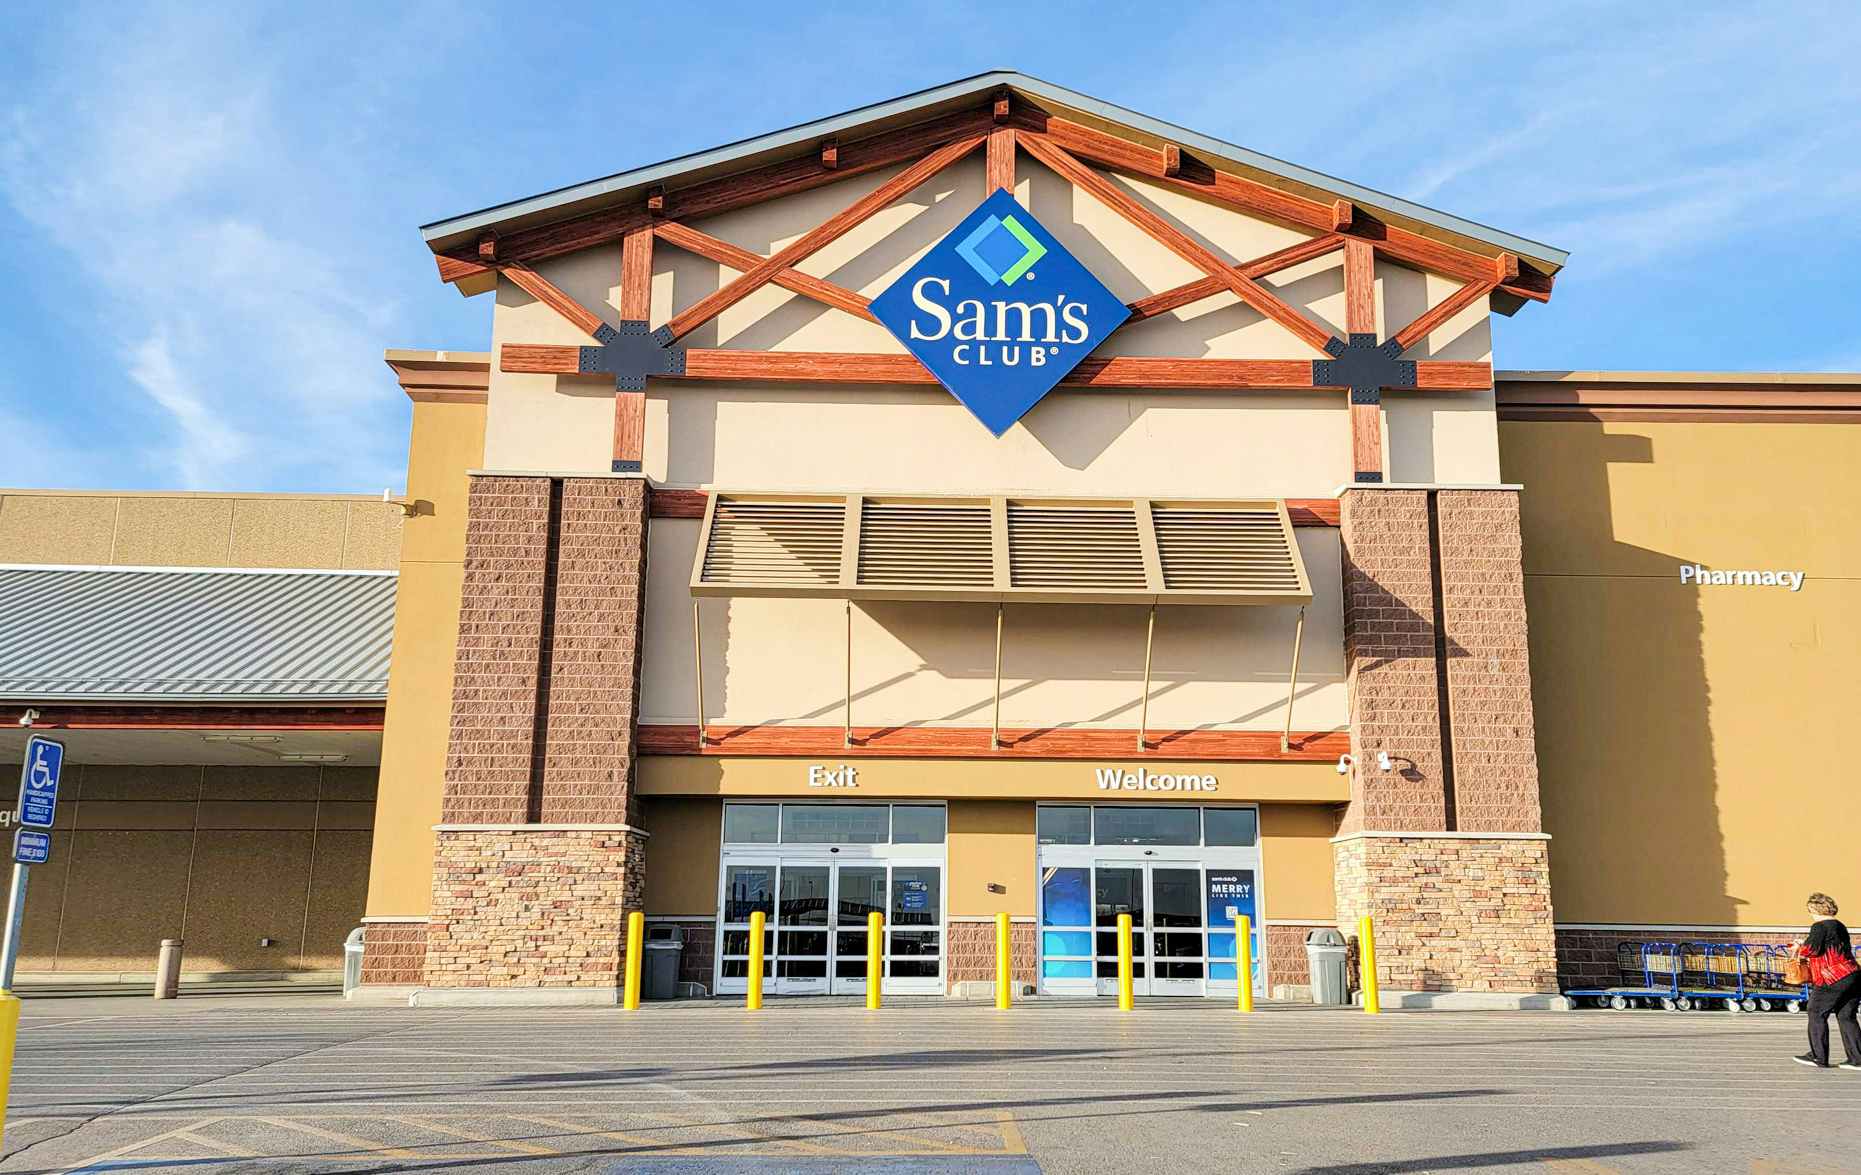 Sam's Club Memorial Day Sale: $495 Washer or Dryer, $999 Sectional, and More